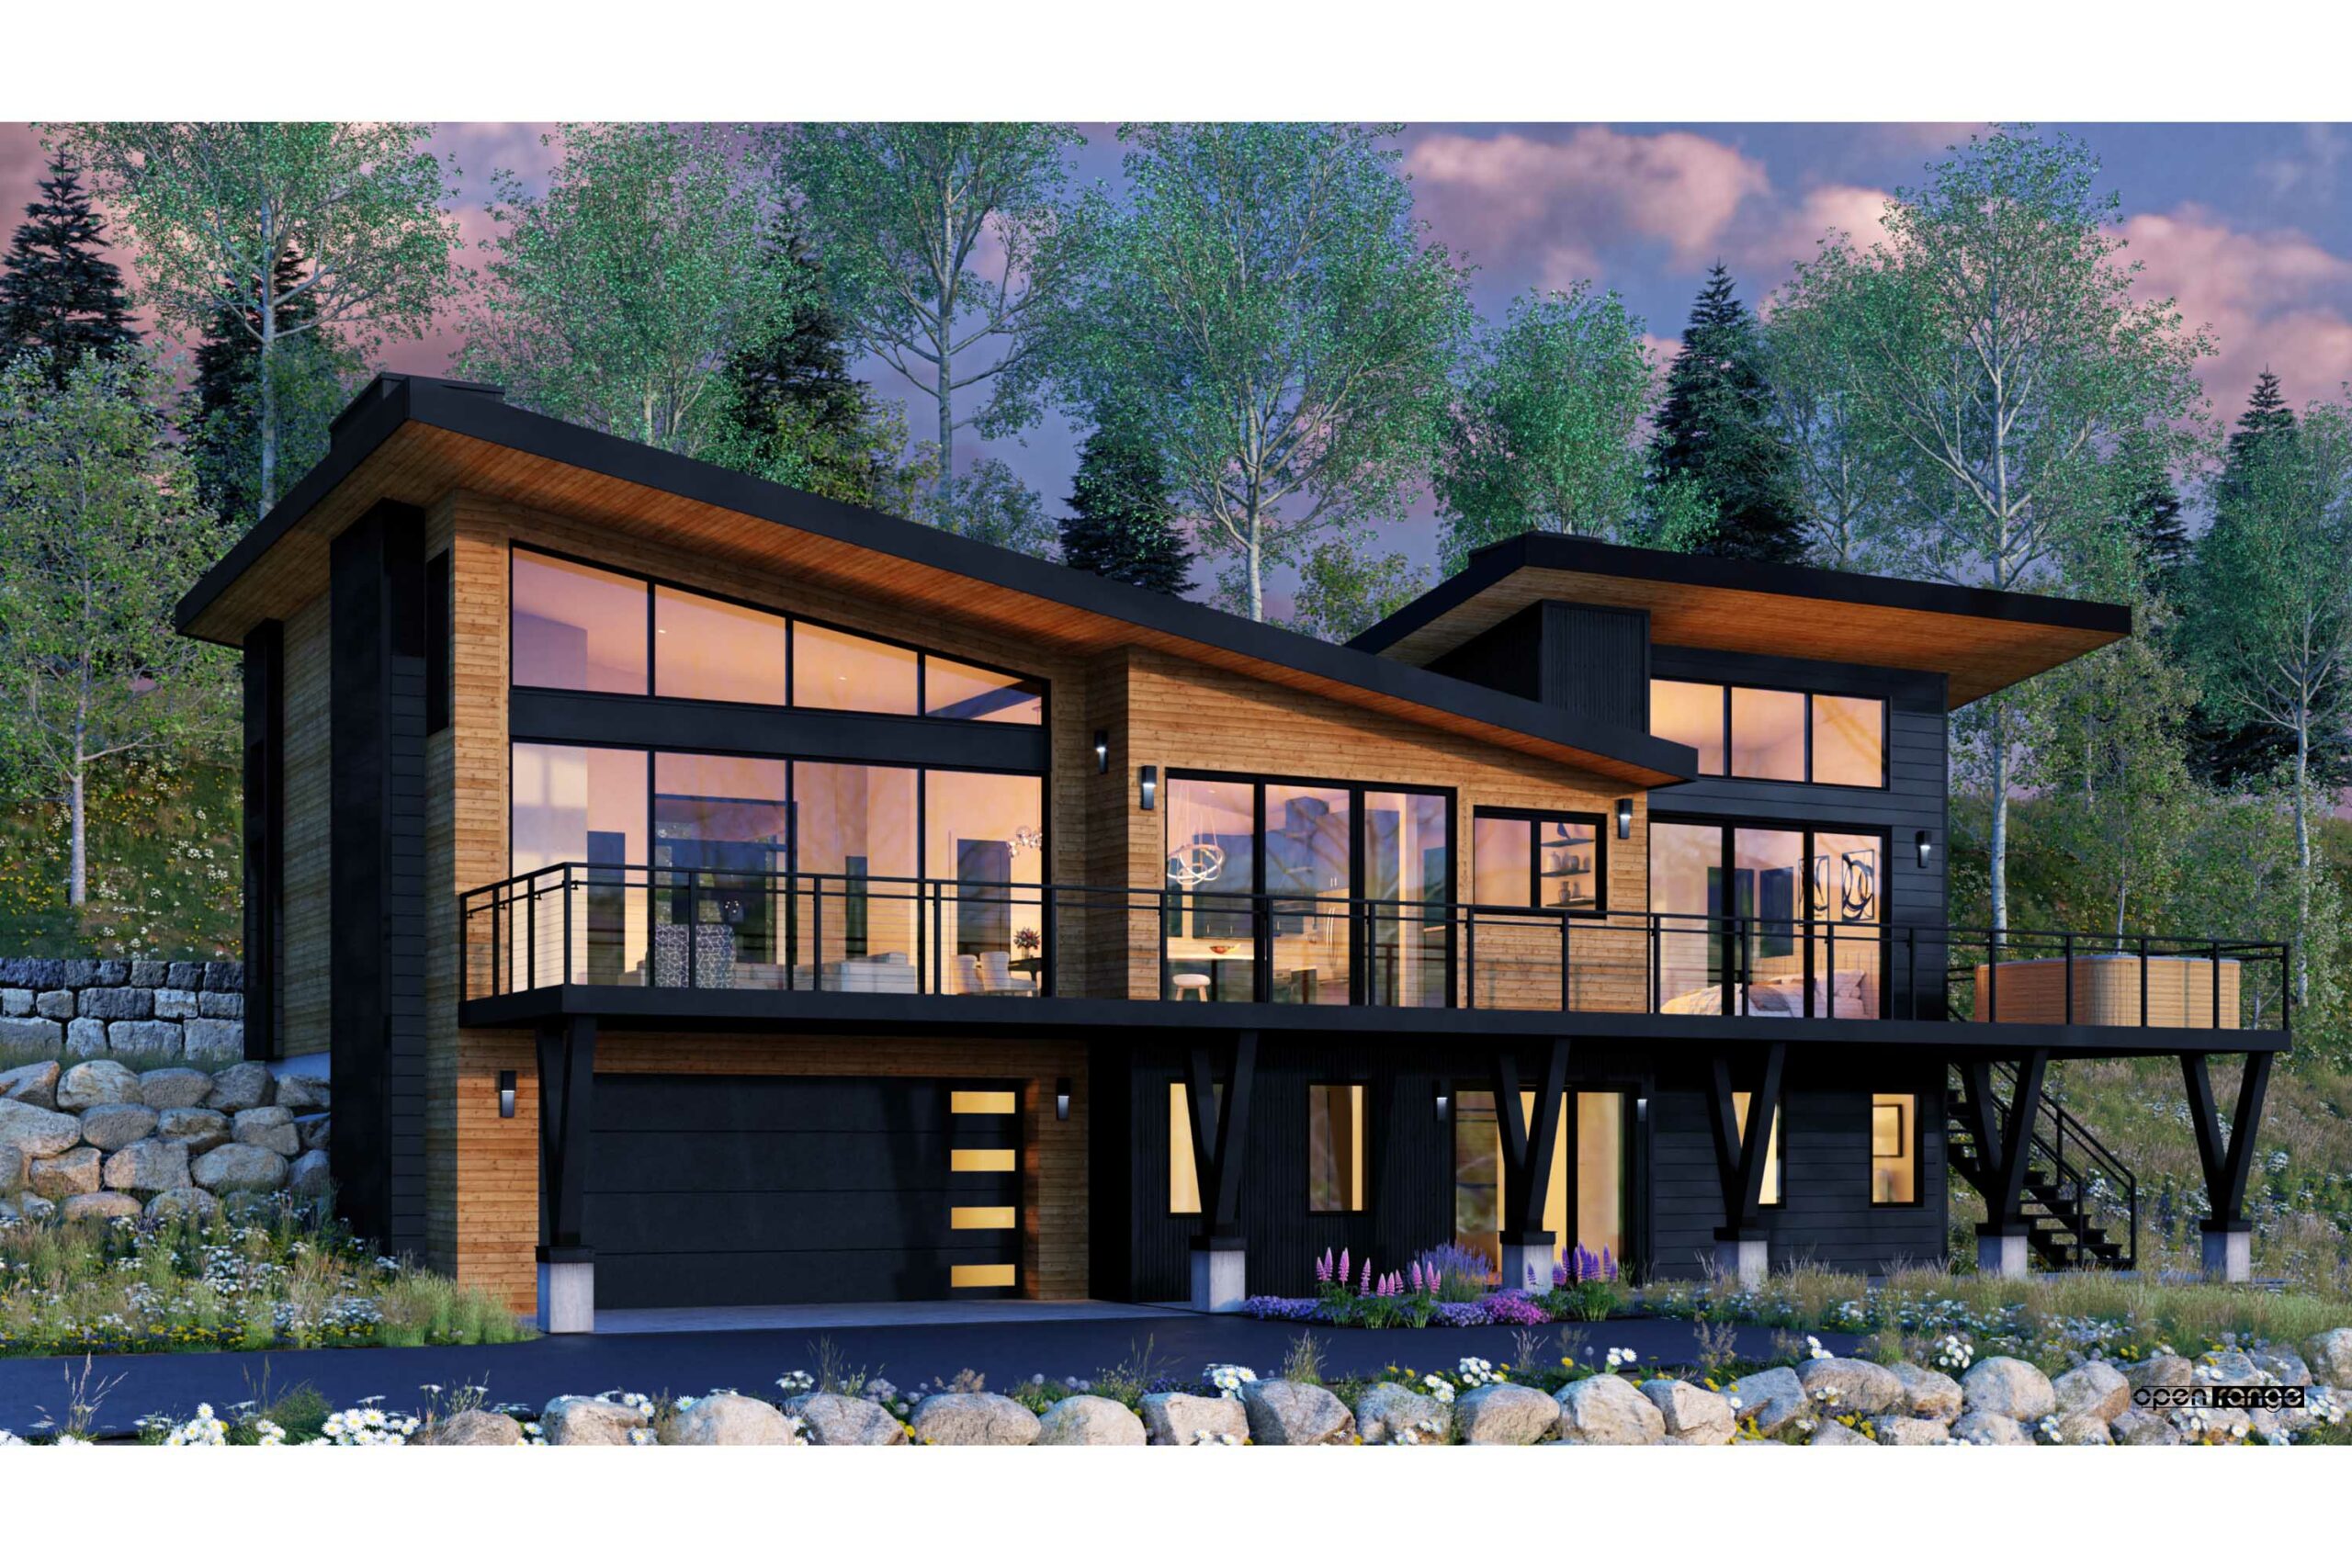 38 Ruby Drive Mt. Crested Butte, Colorado - Exterior Rendering